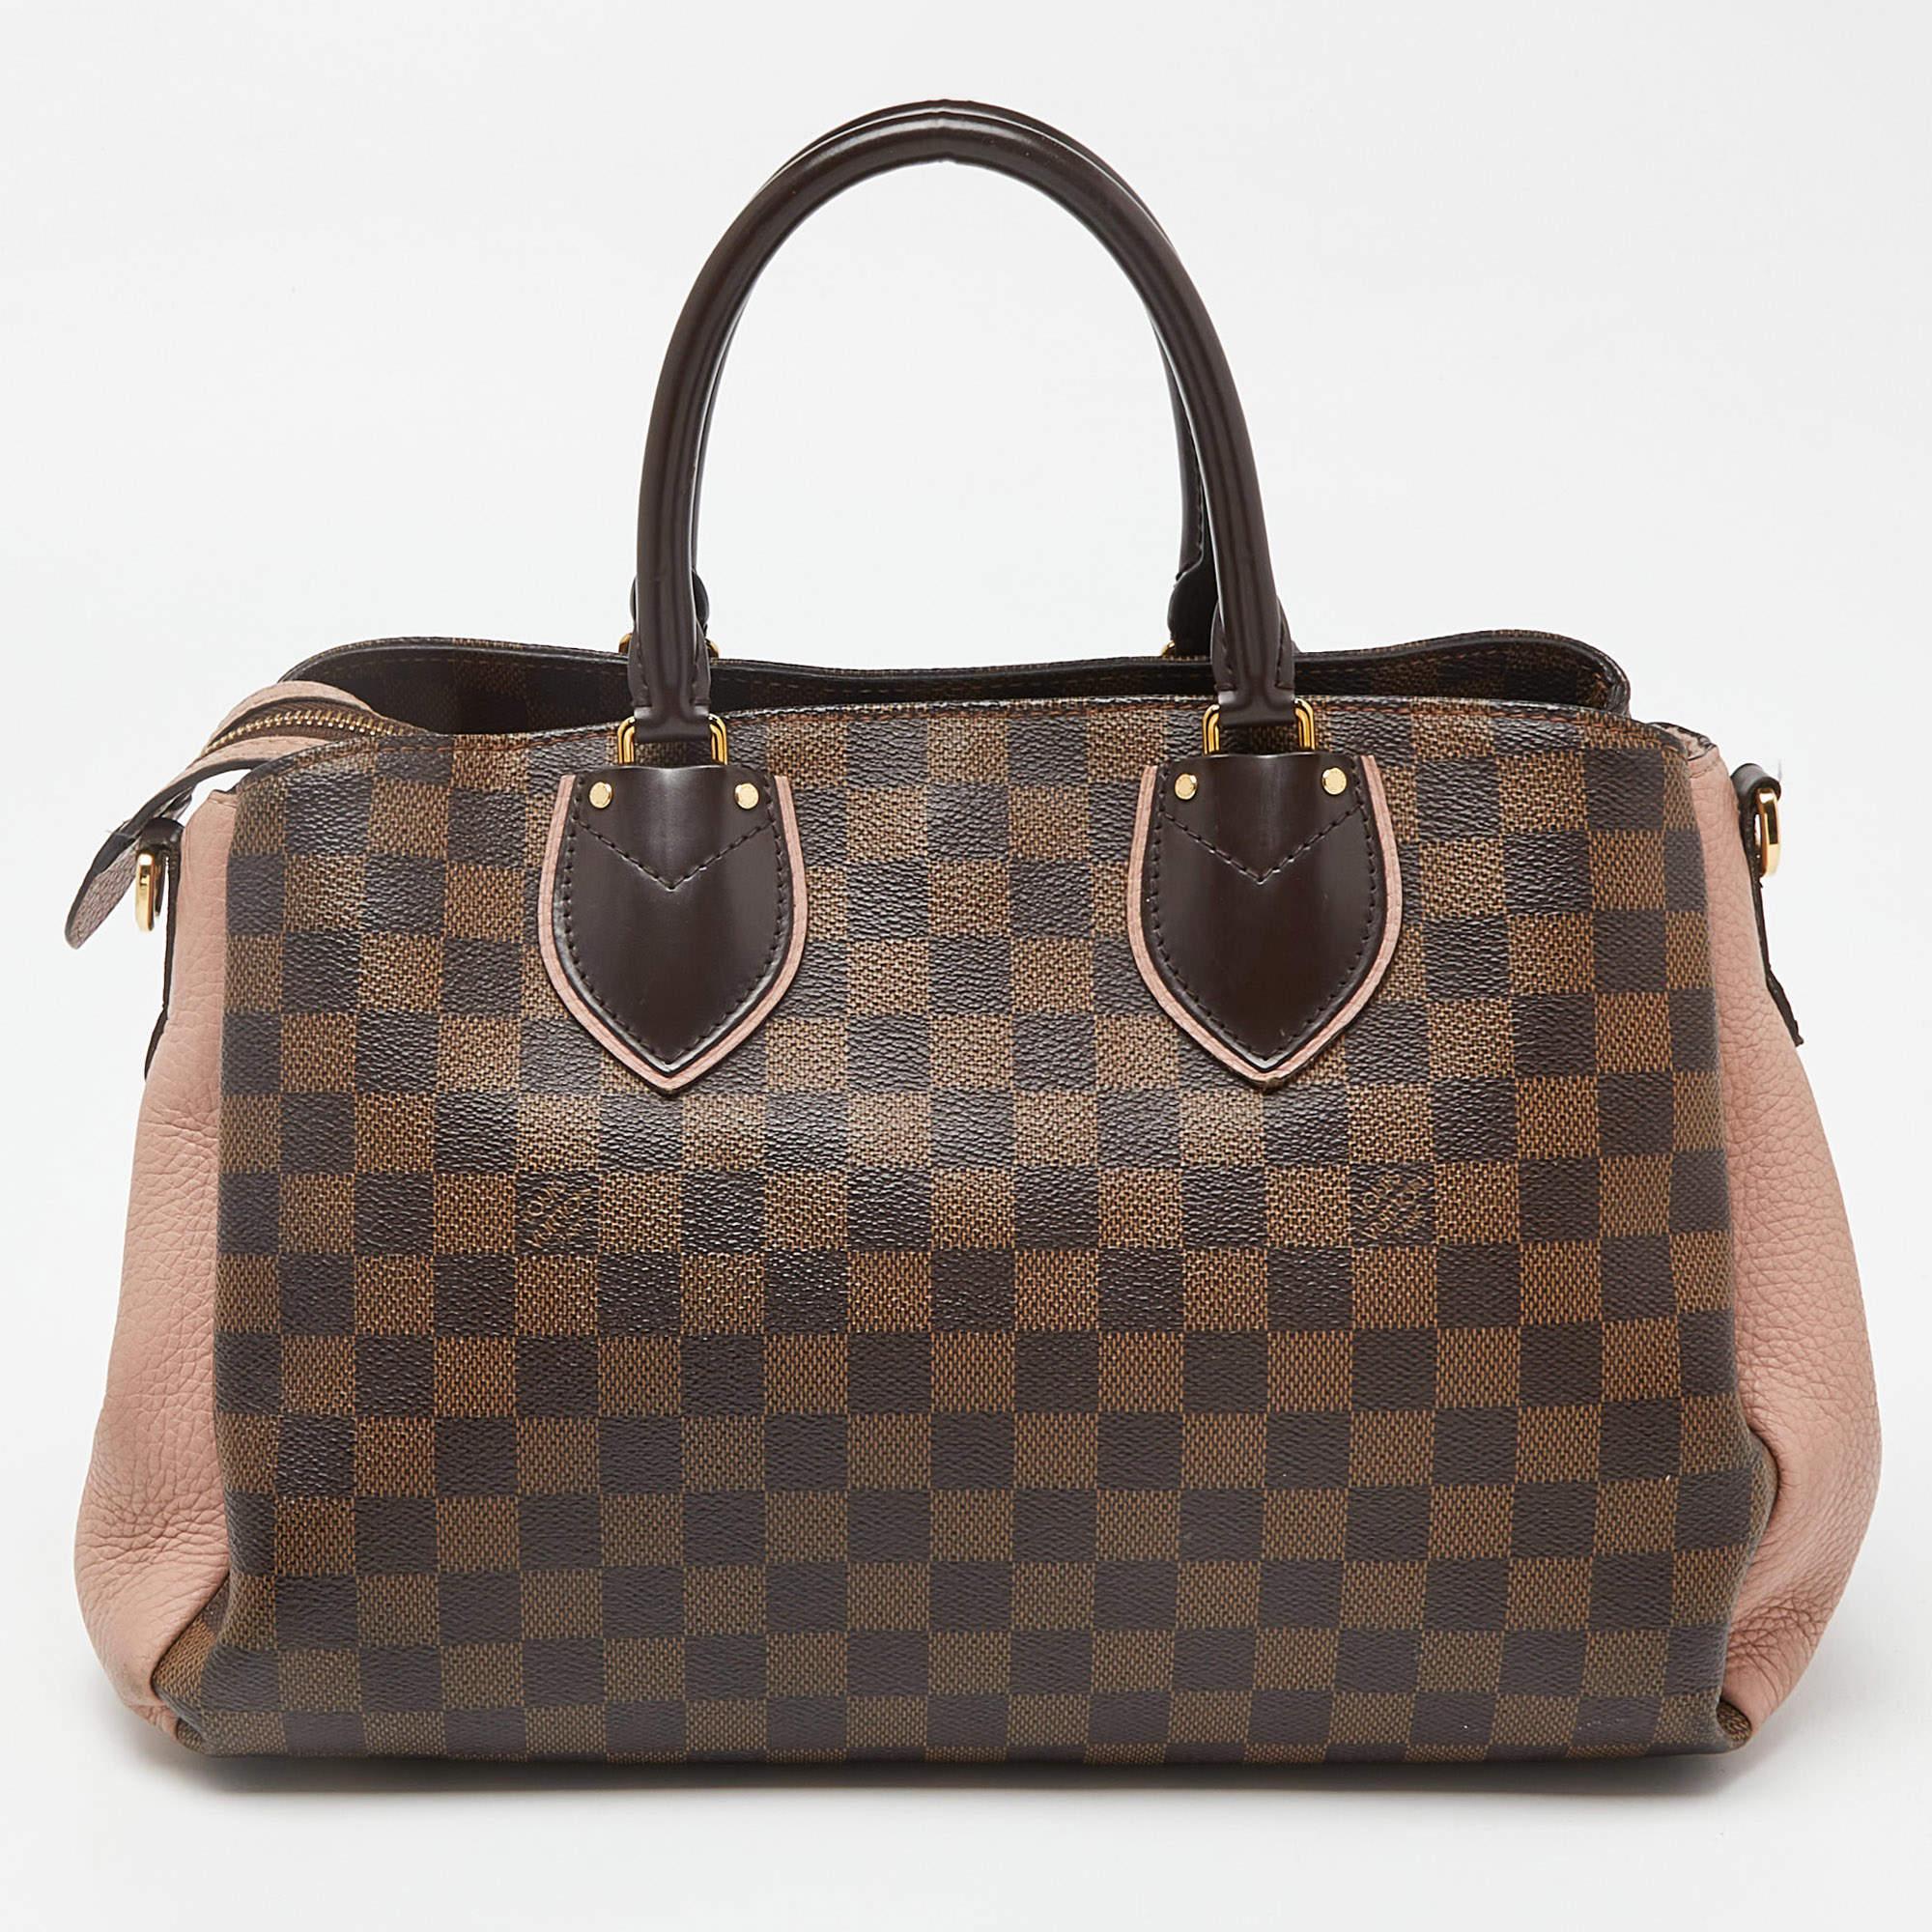 Louis Vuitton Damier Ebene Canvas and Leather Normandy Bag For Sale 15